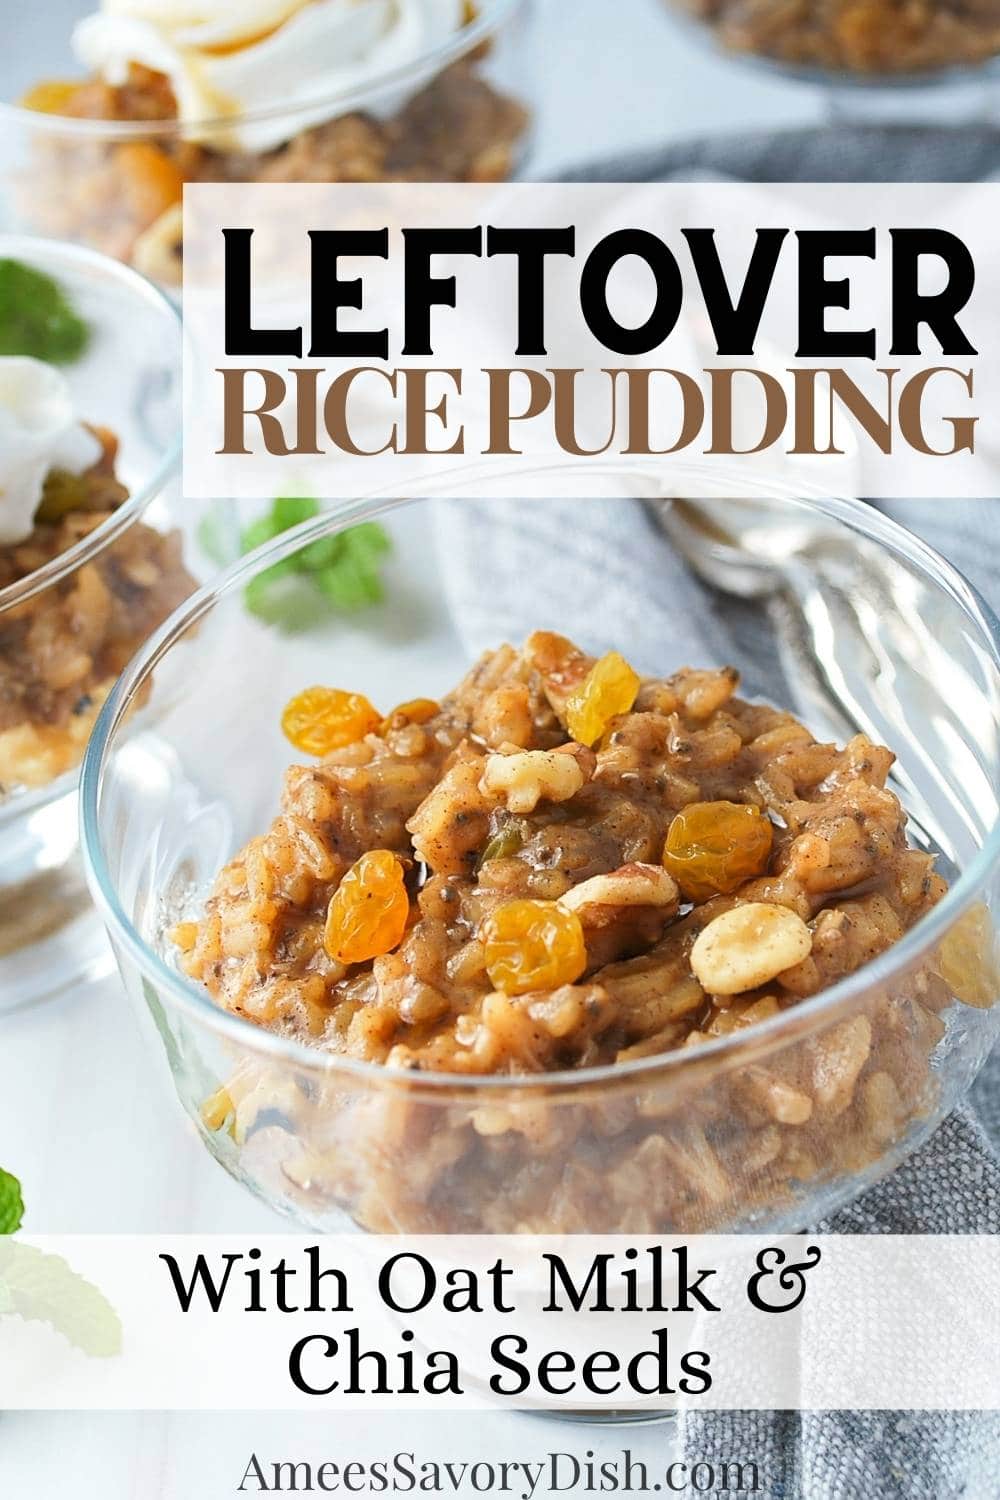 This simple and satisfying dairy-free rice pudding recipe uses cooked rice, oat milk, dried fruit, and unrefined sweeteners. via @Ameessavorydish